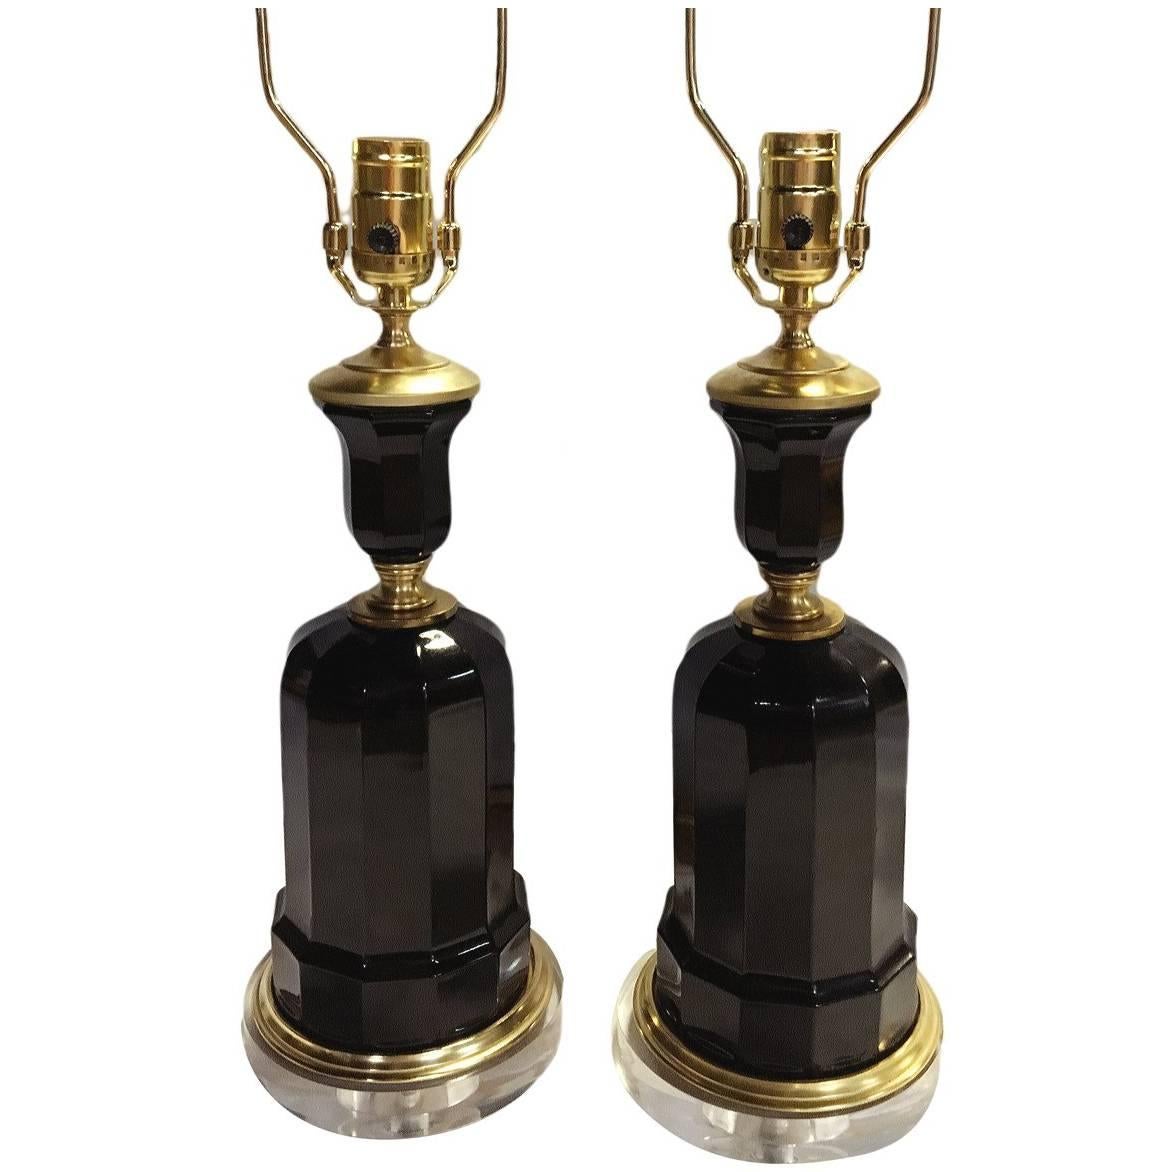 Pair of 1950’s French black glass table lamps with gilt details and lucite bases.

Measurements:
Height of body: 14″
Height to shade rest: 22″
Diameter: 6